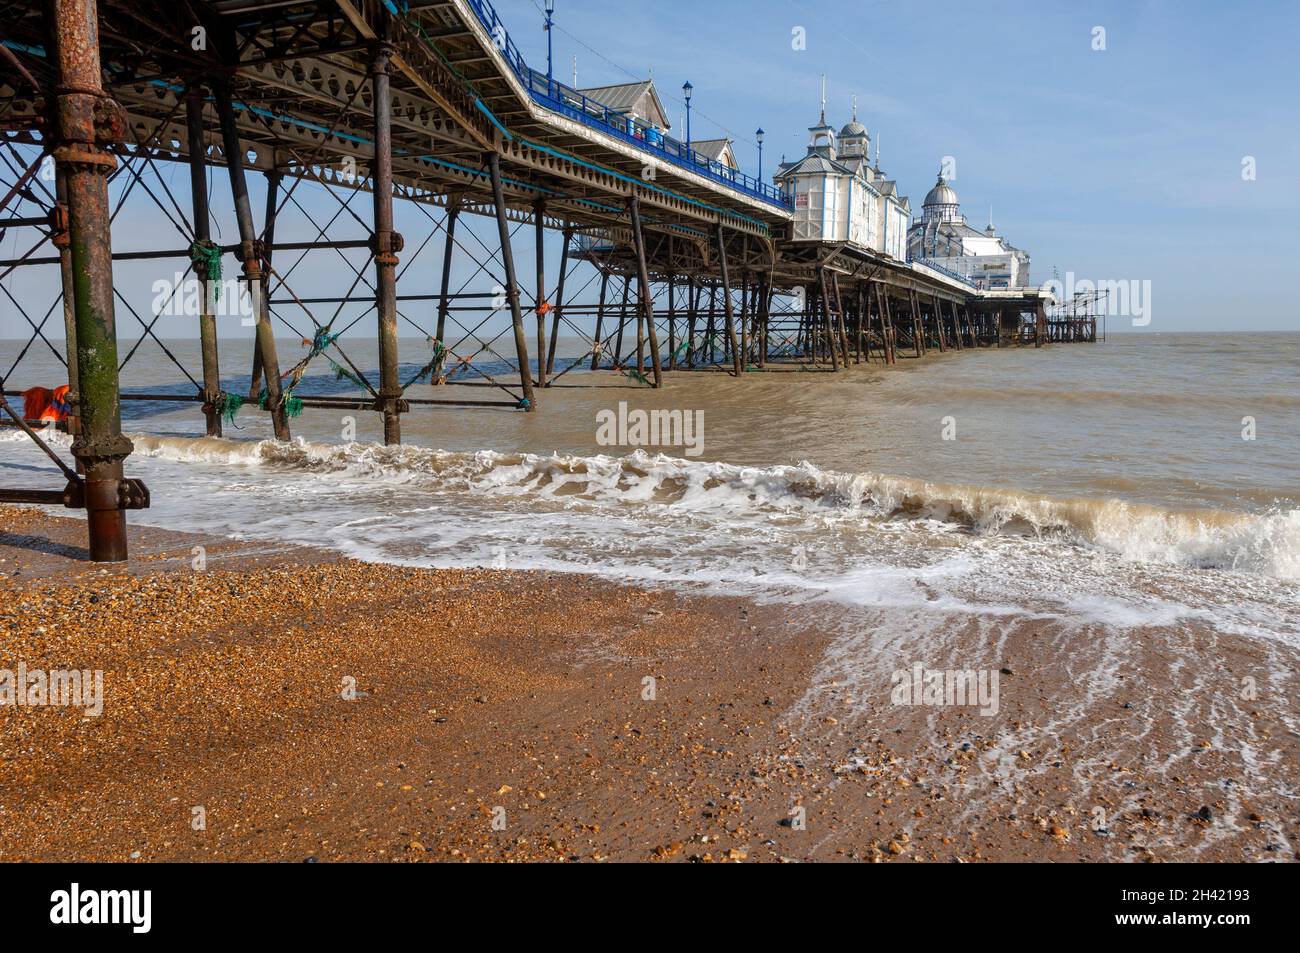 The Pier, Eastbourne, East Sussex, England, UK Stock Photo